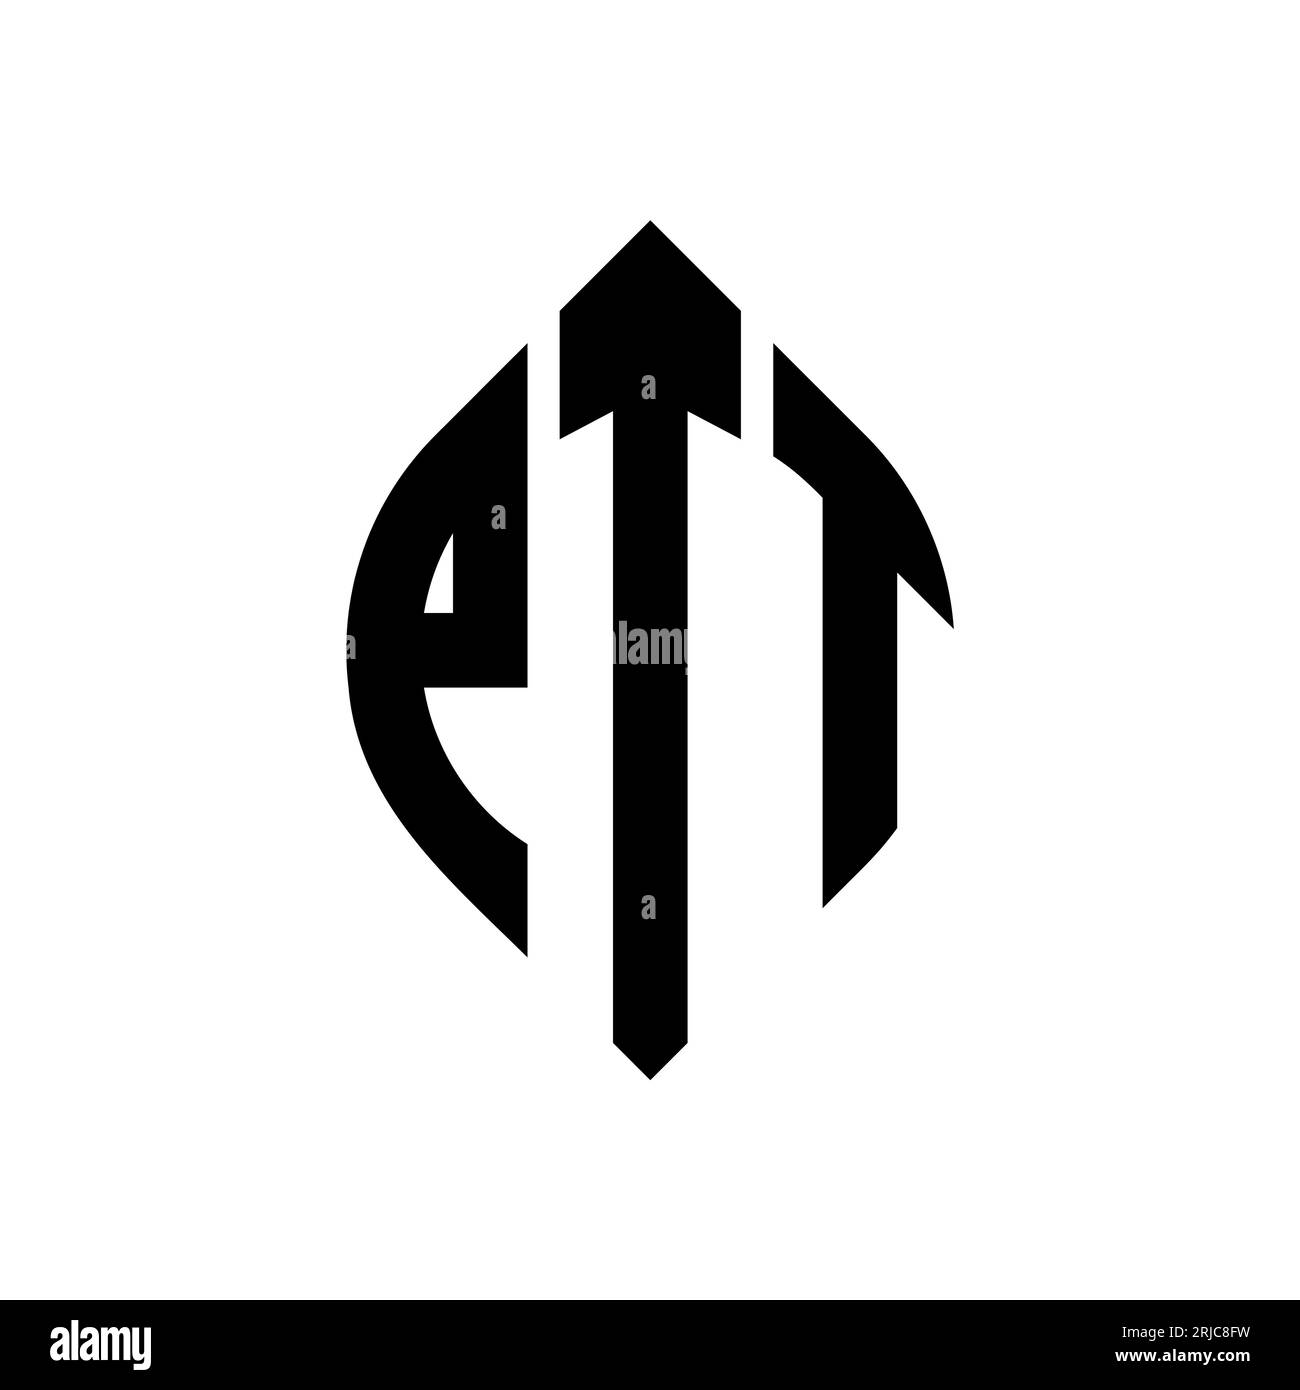 PTT circle letter logo design with circle and ellipse shape. PTT ellipse letters with typographic style. The three initials form a circle logo. PTT Ci Stock Vector